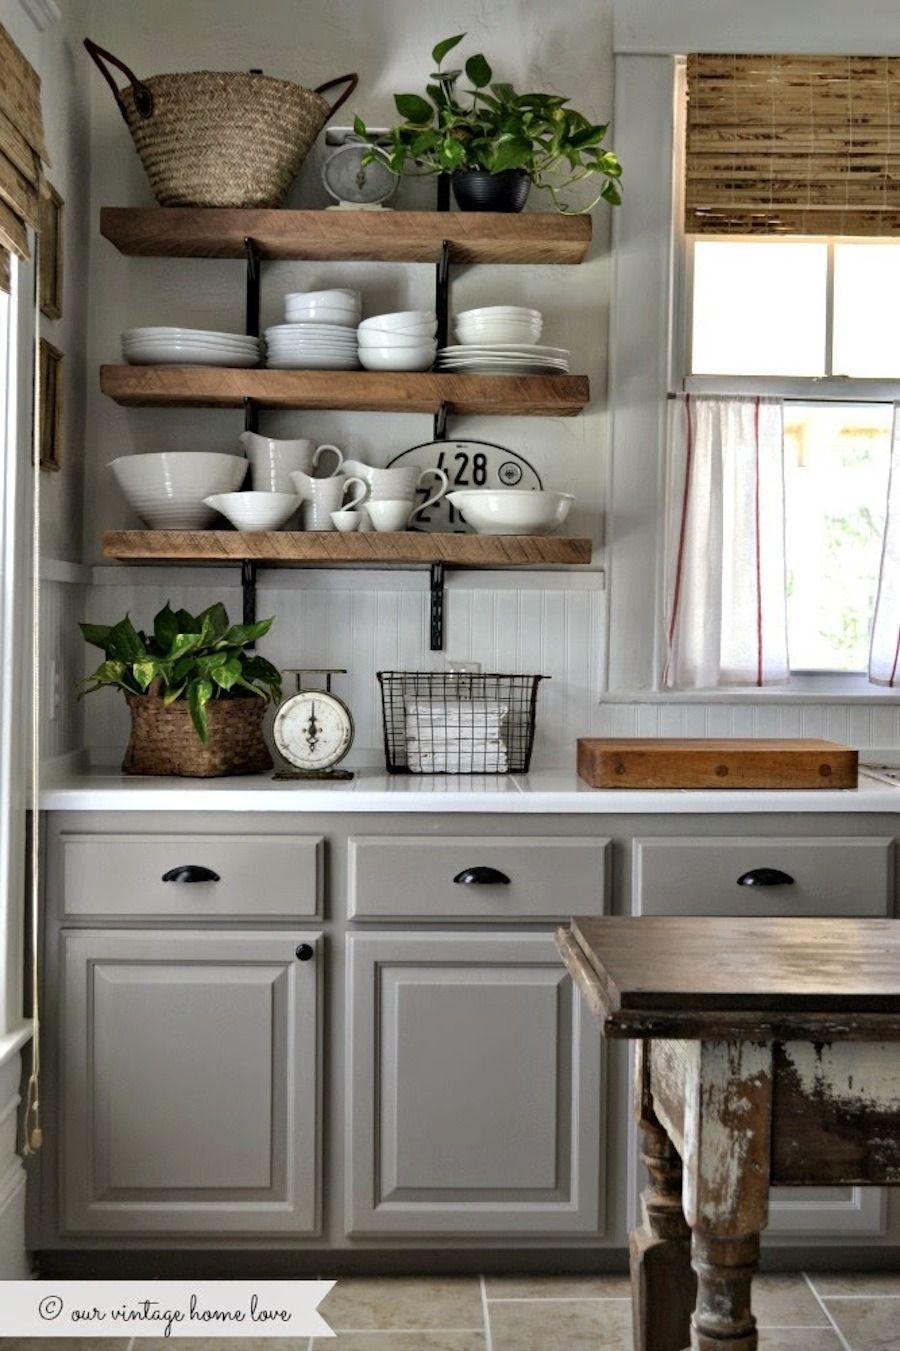 20 Best Rustic Country Kitchen Design Ideas and Decorations for 20